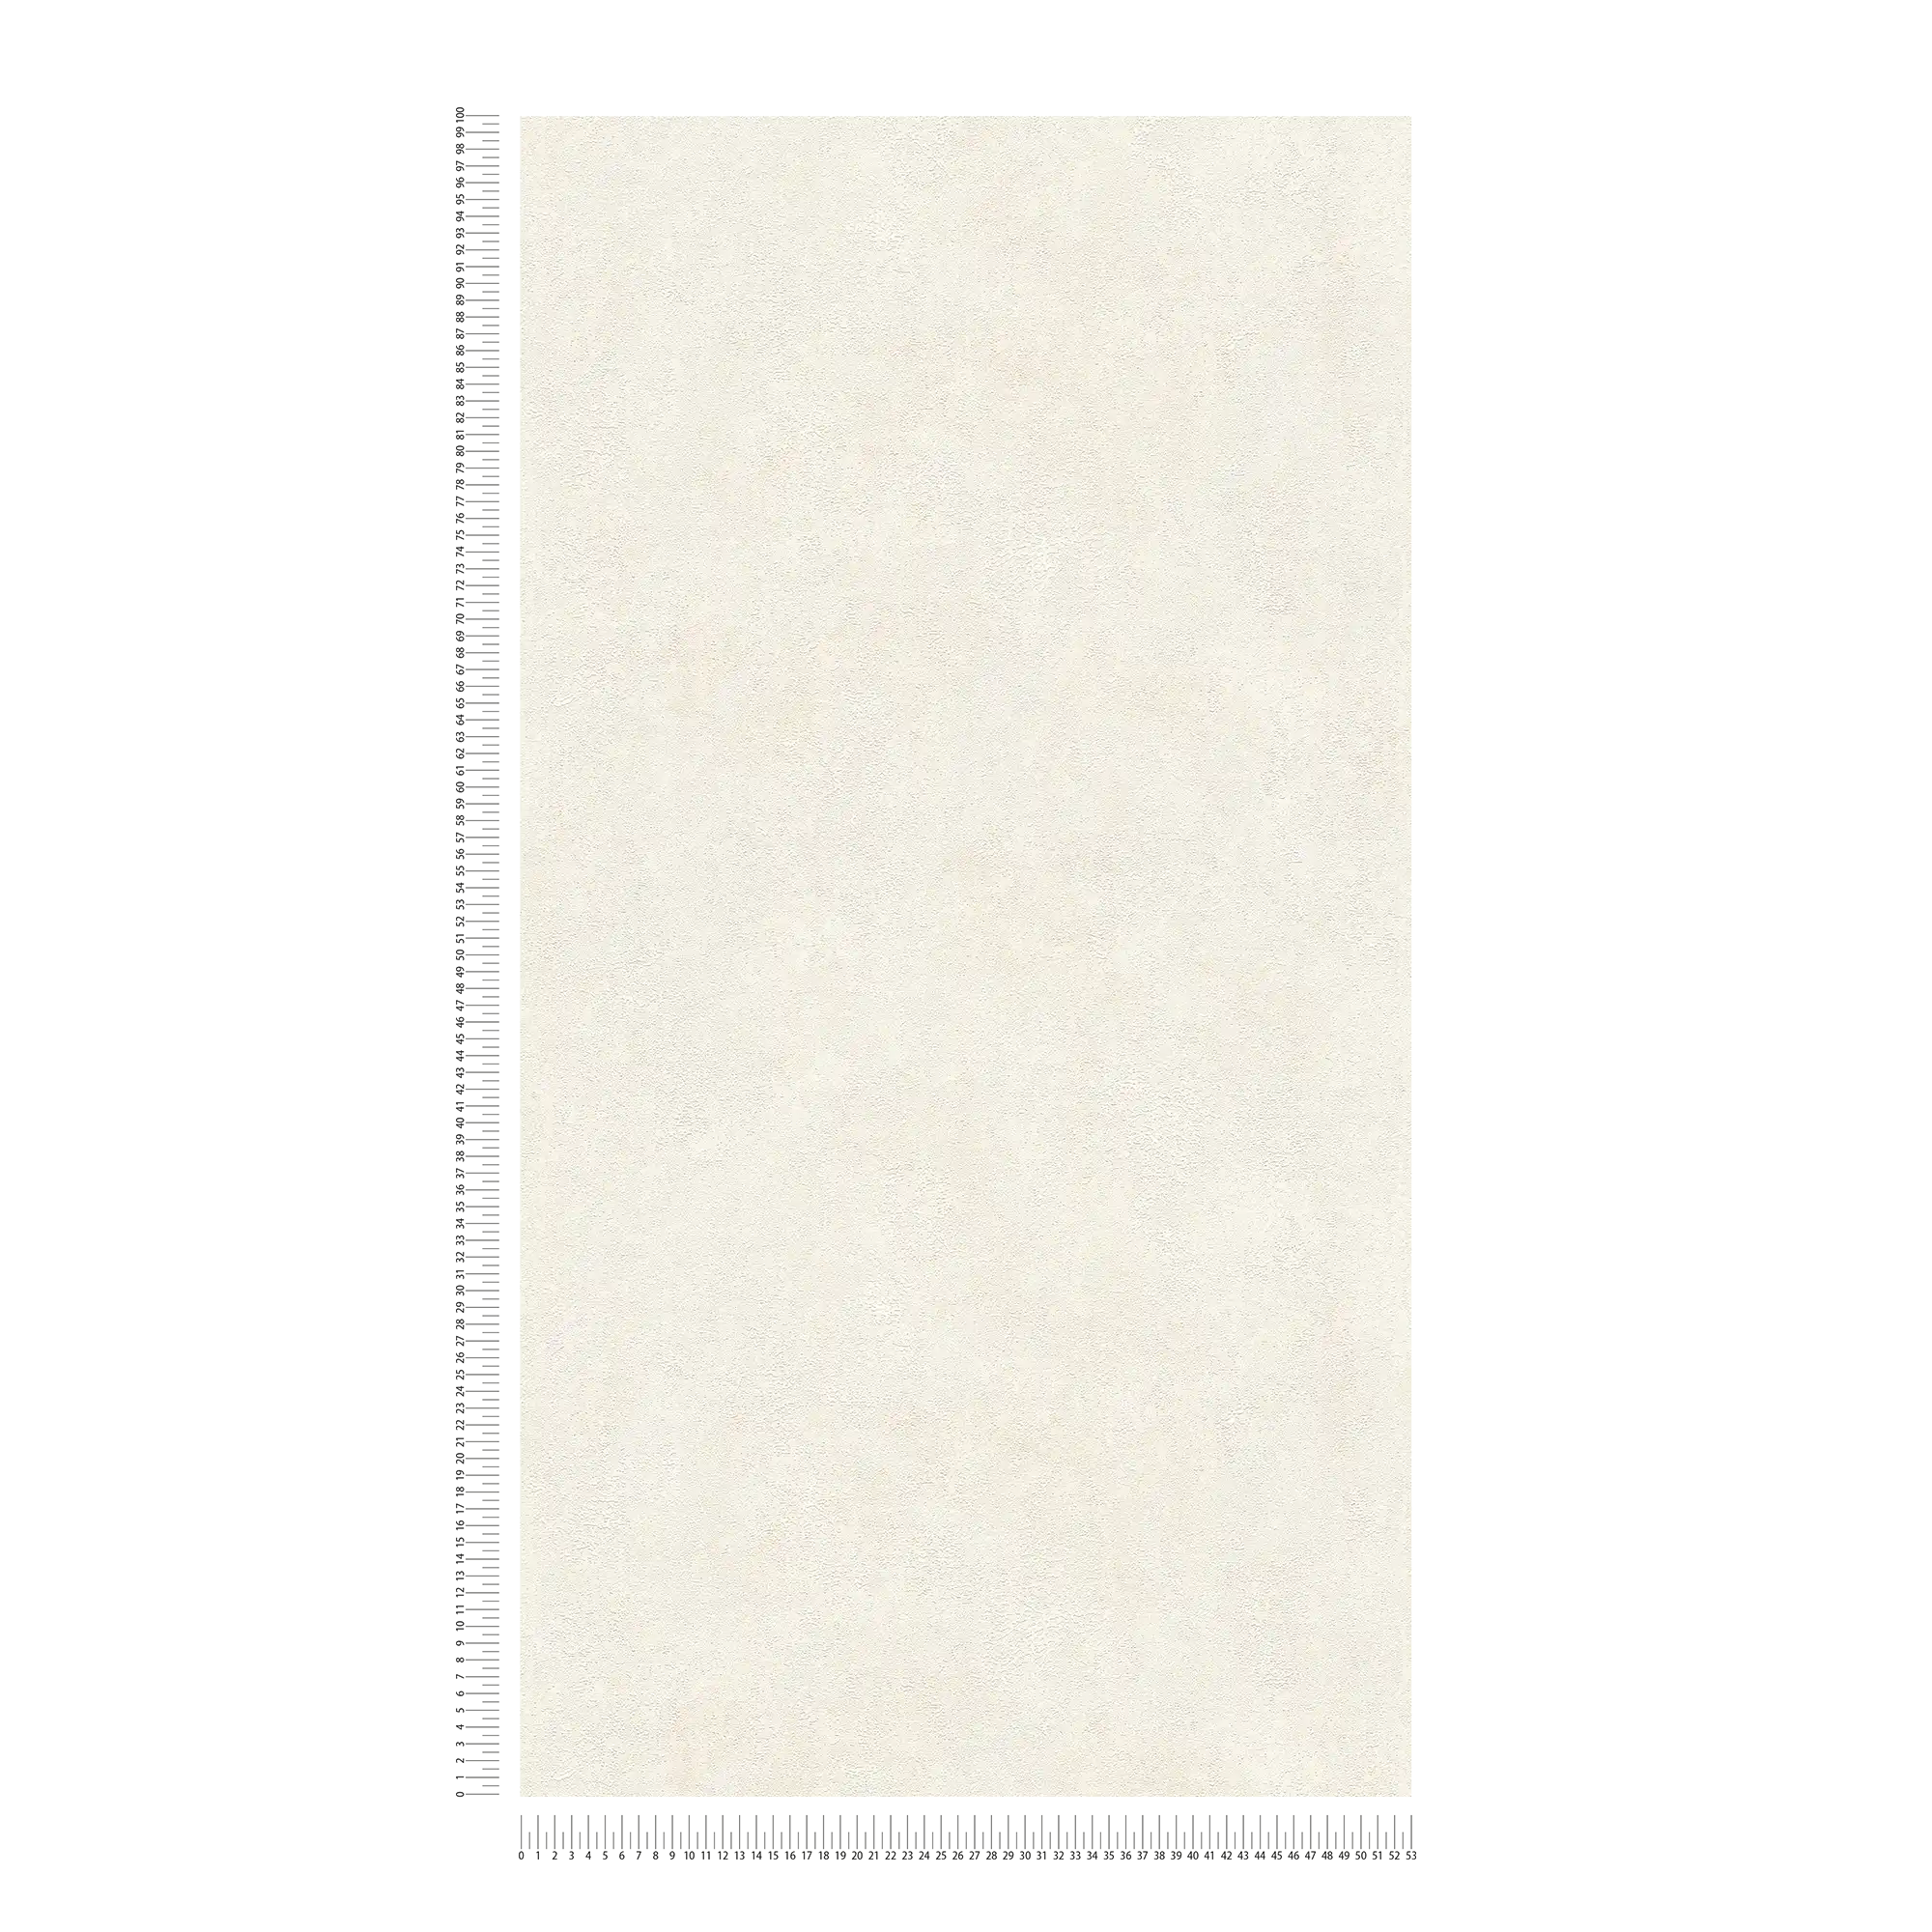             Non-woven wallpaper with light shimmer accents - cream, white
        